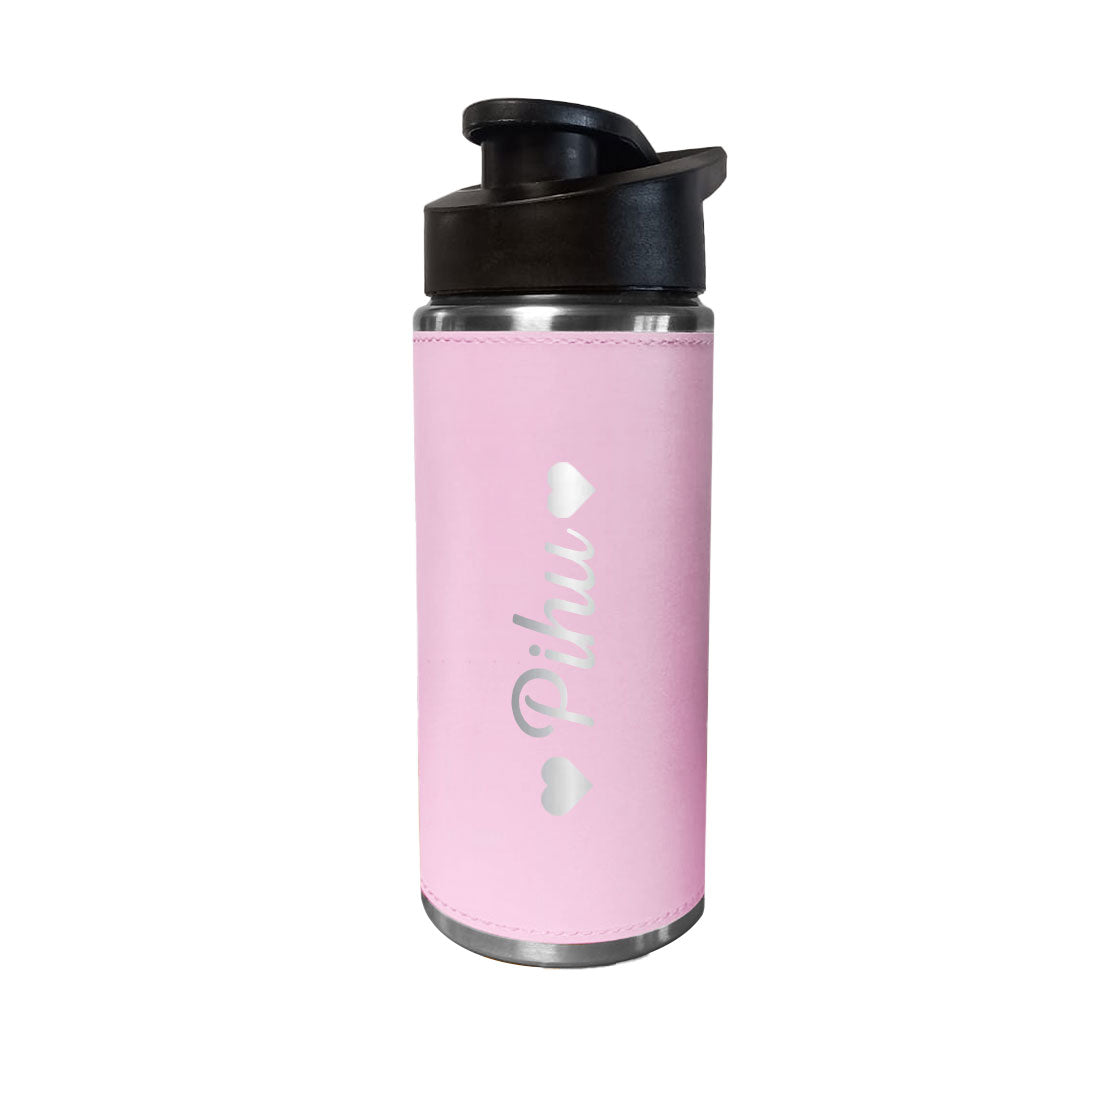 Customized Water Bottles With Names Stainless Steel PU Leather Pink Sipper Bottles For Girls